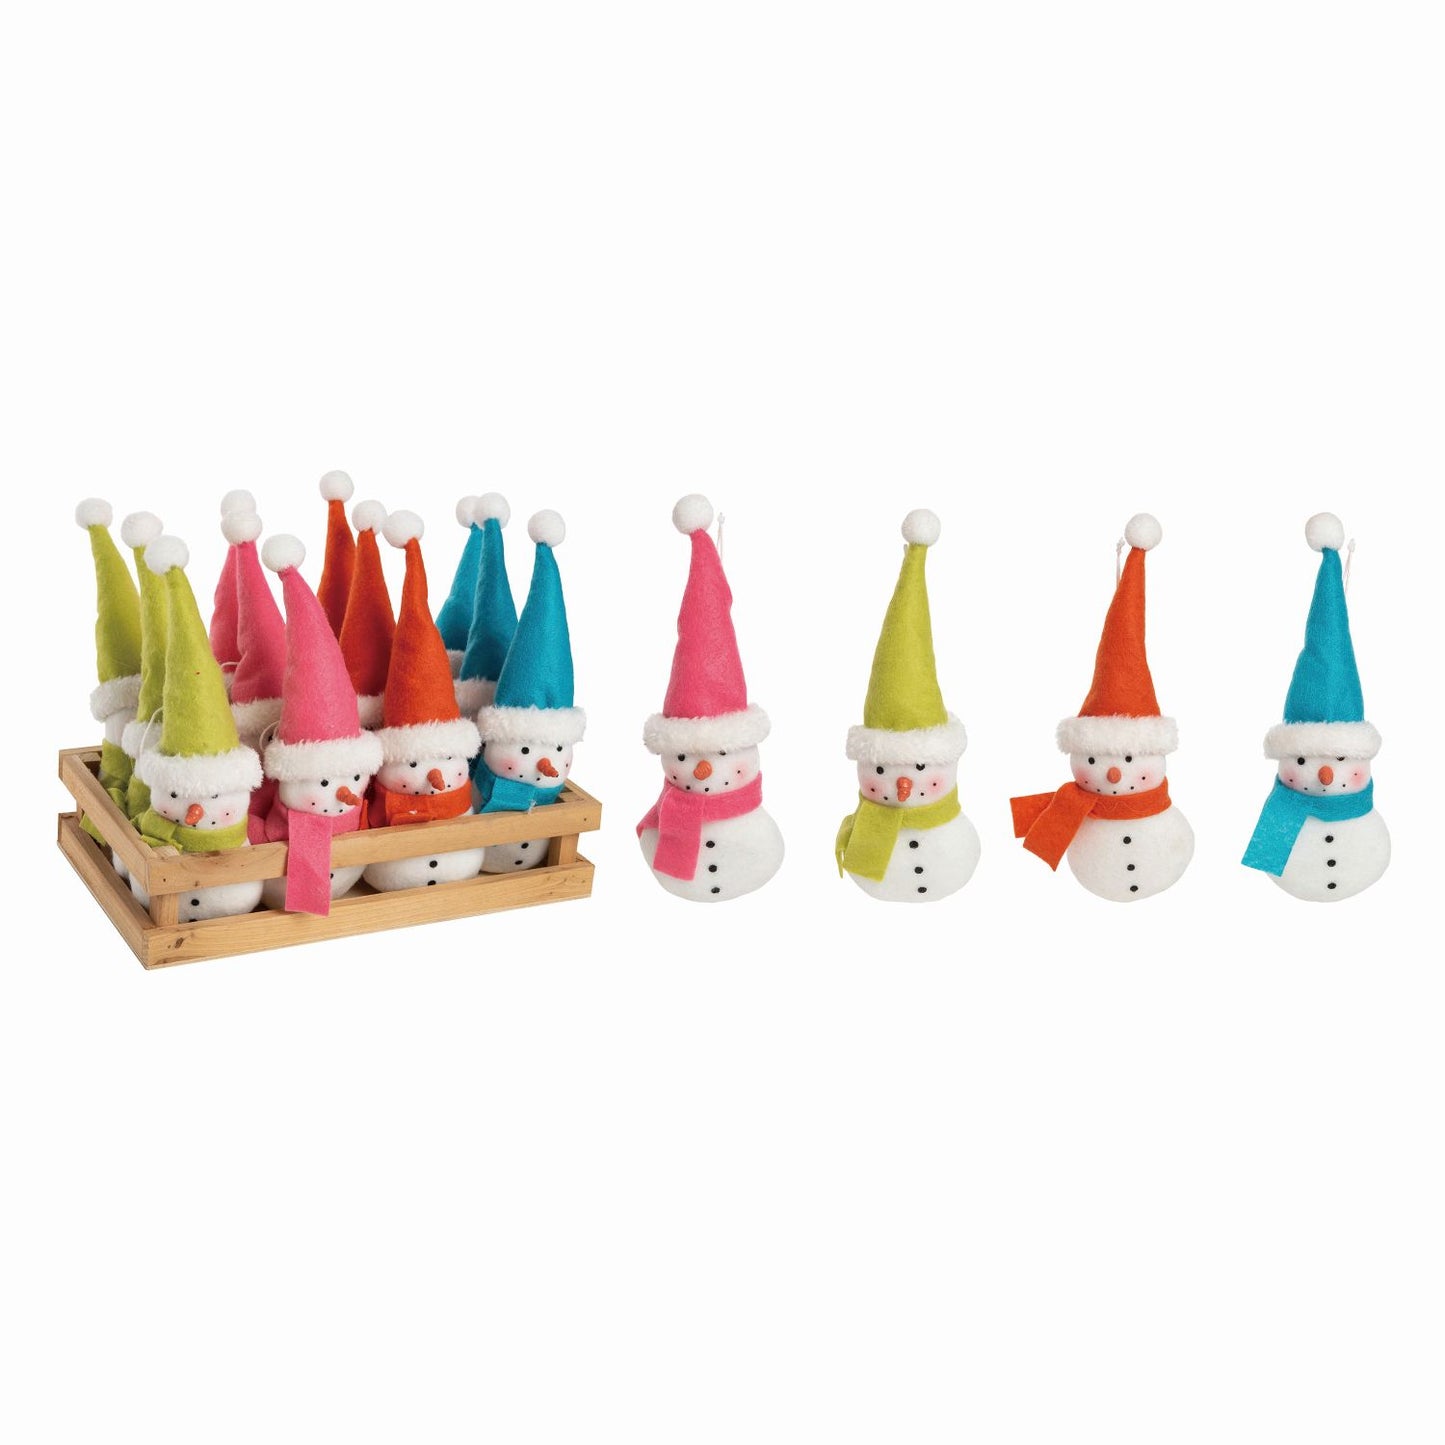 Transpac Fabric Colorful Snowman Ornaments In Display, Set Of 12